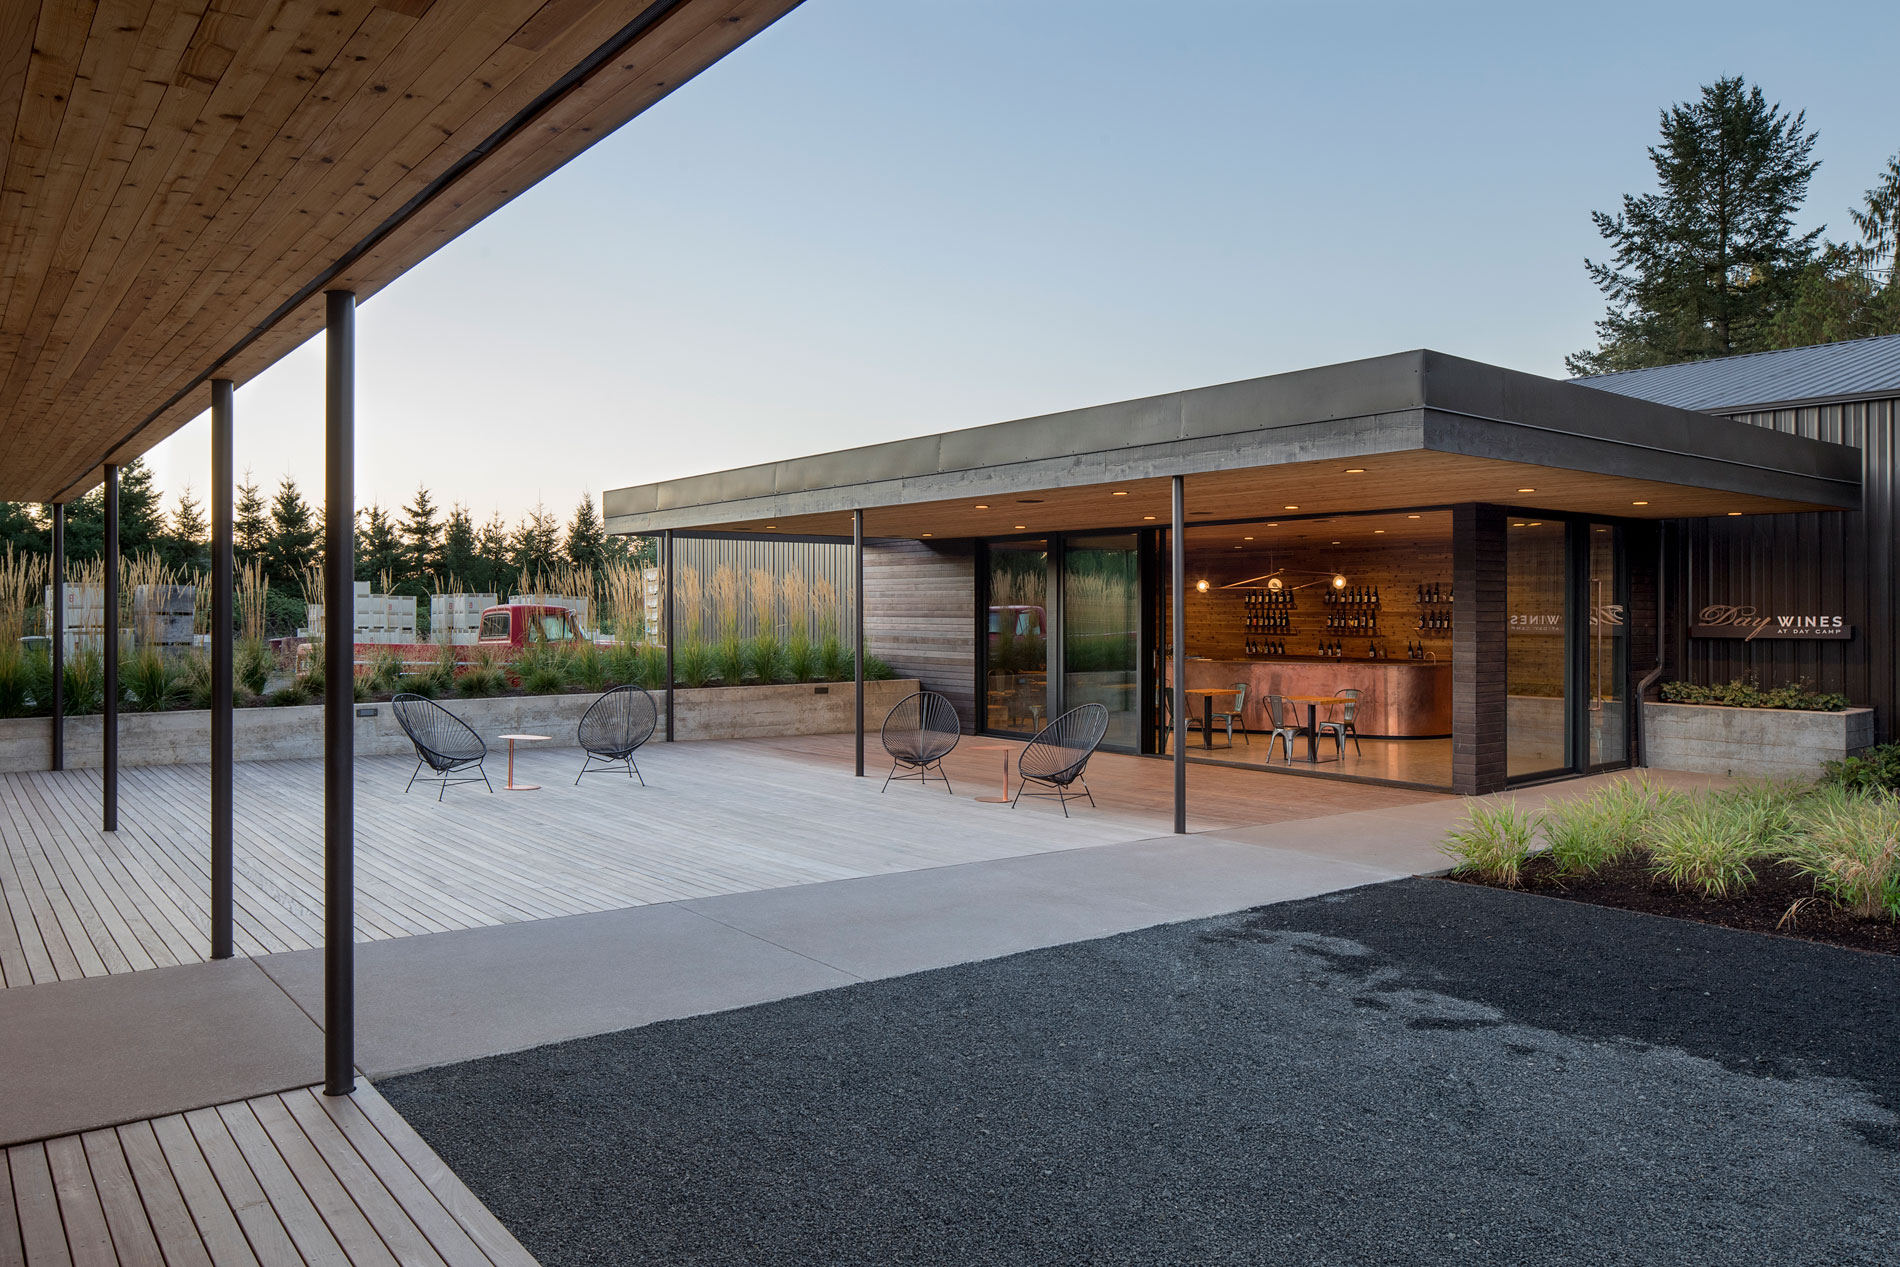 Outdoor tasting options at Day Wines in Dundee, Oregon